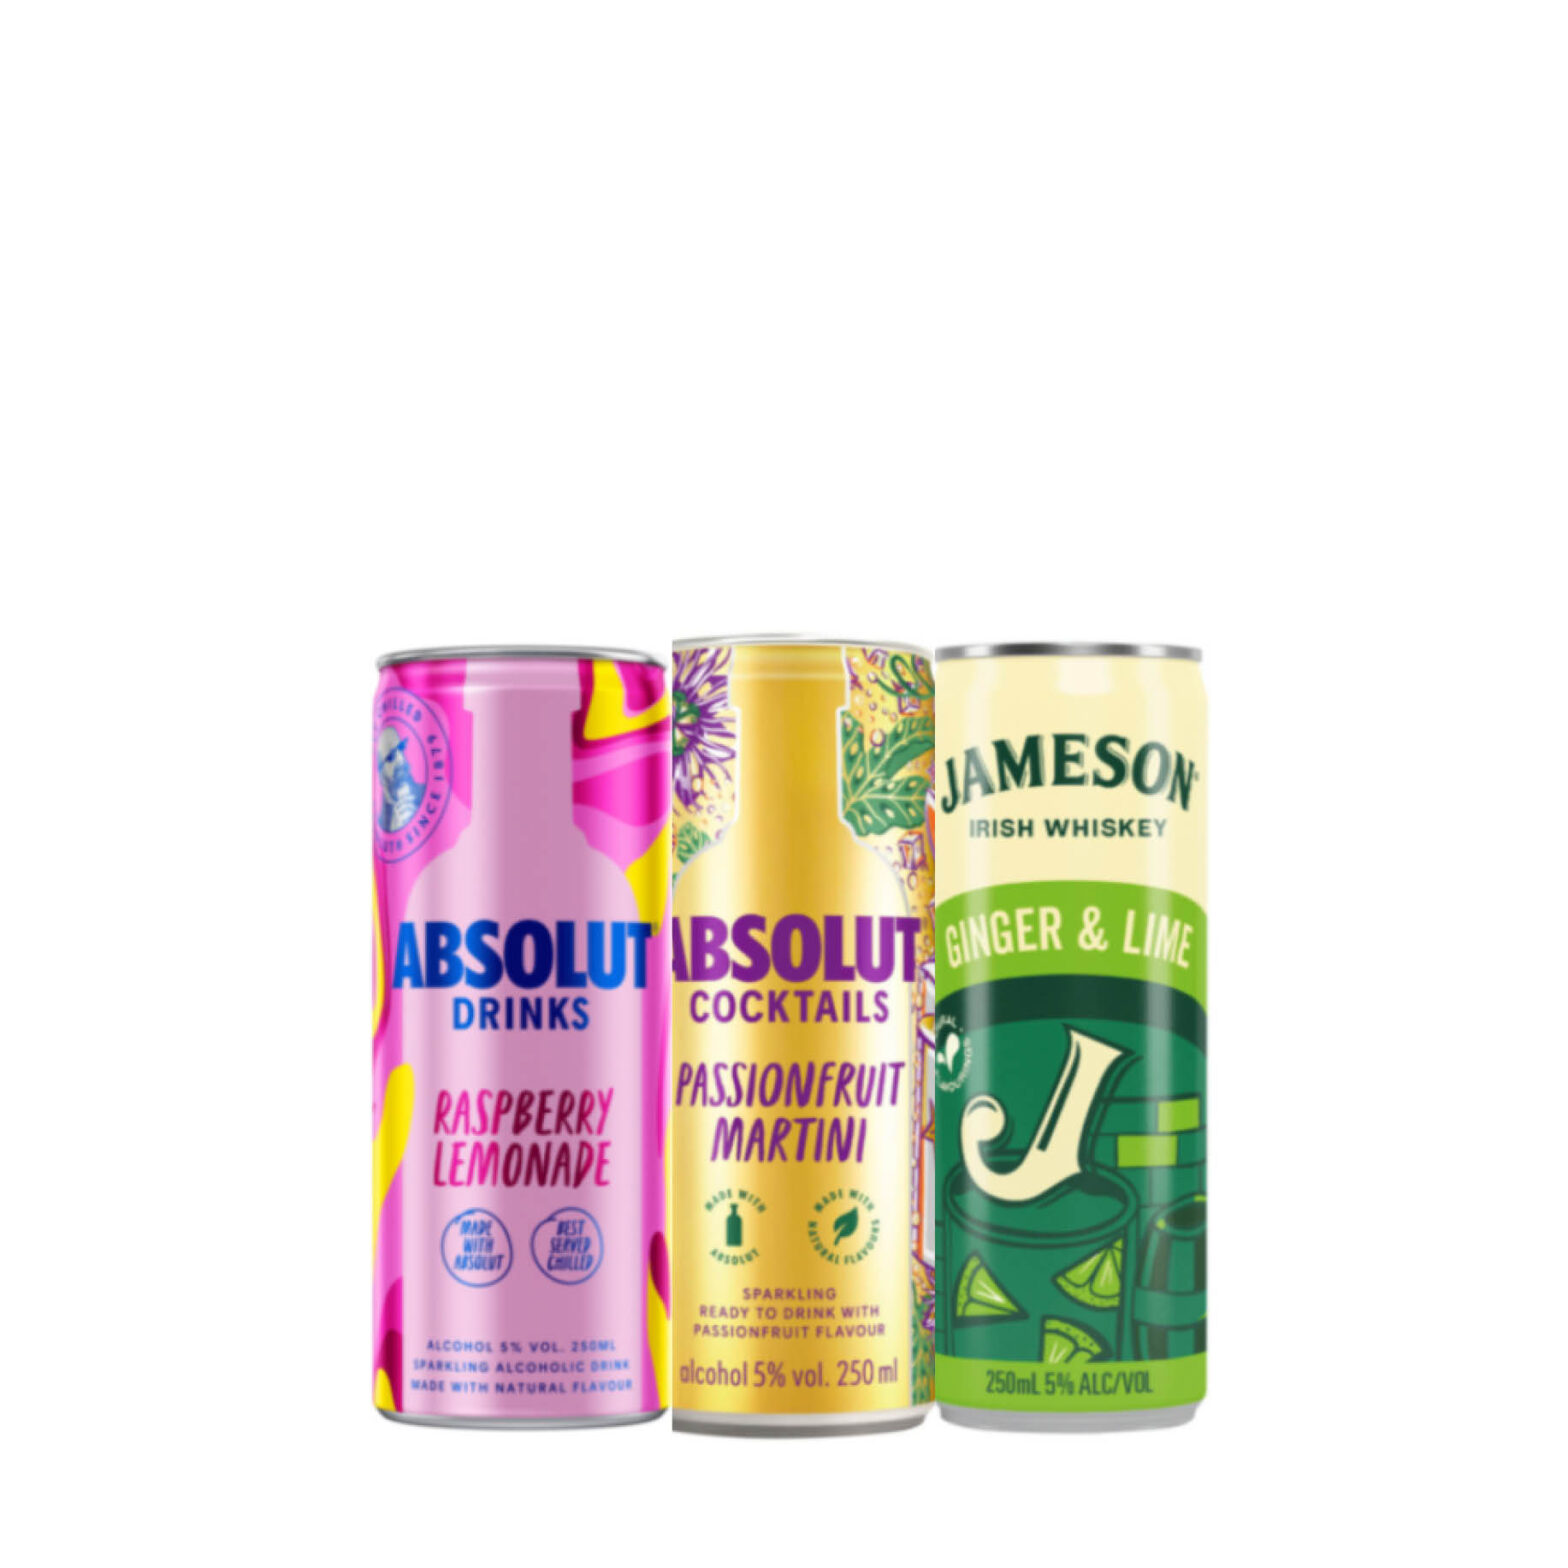 Jameson Ginger & Lime Can / Absolut Passionfruit Can / Absolut Mixt Raspberry & Lemon Can